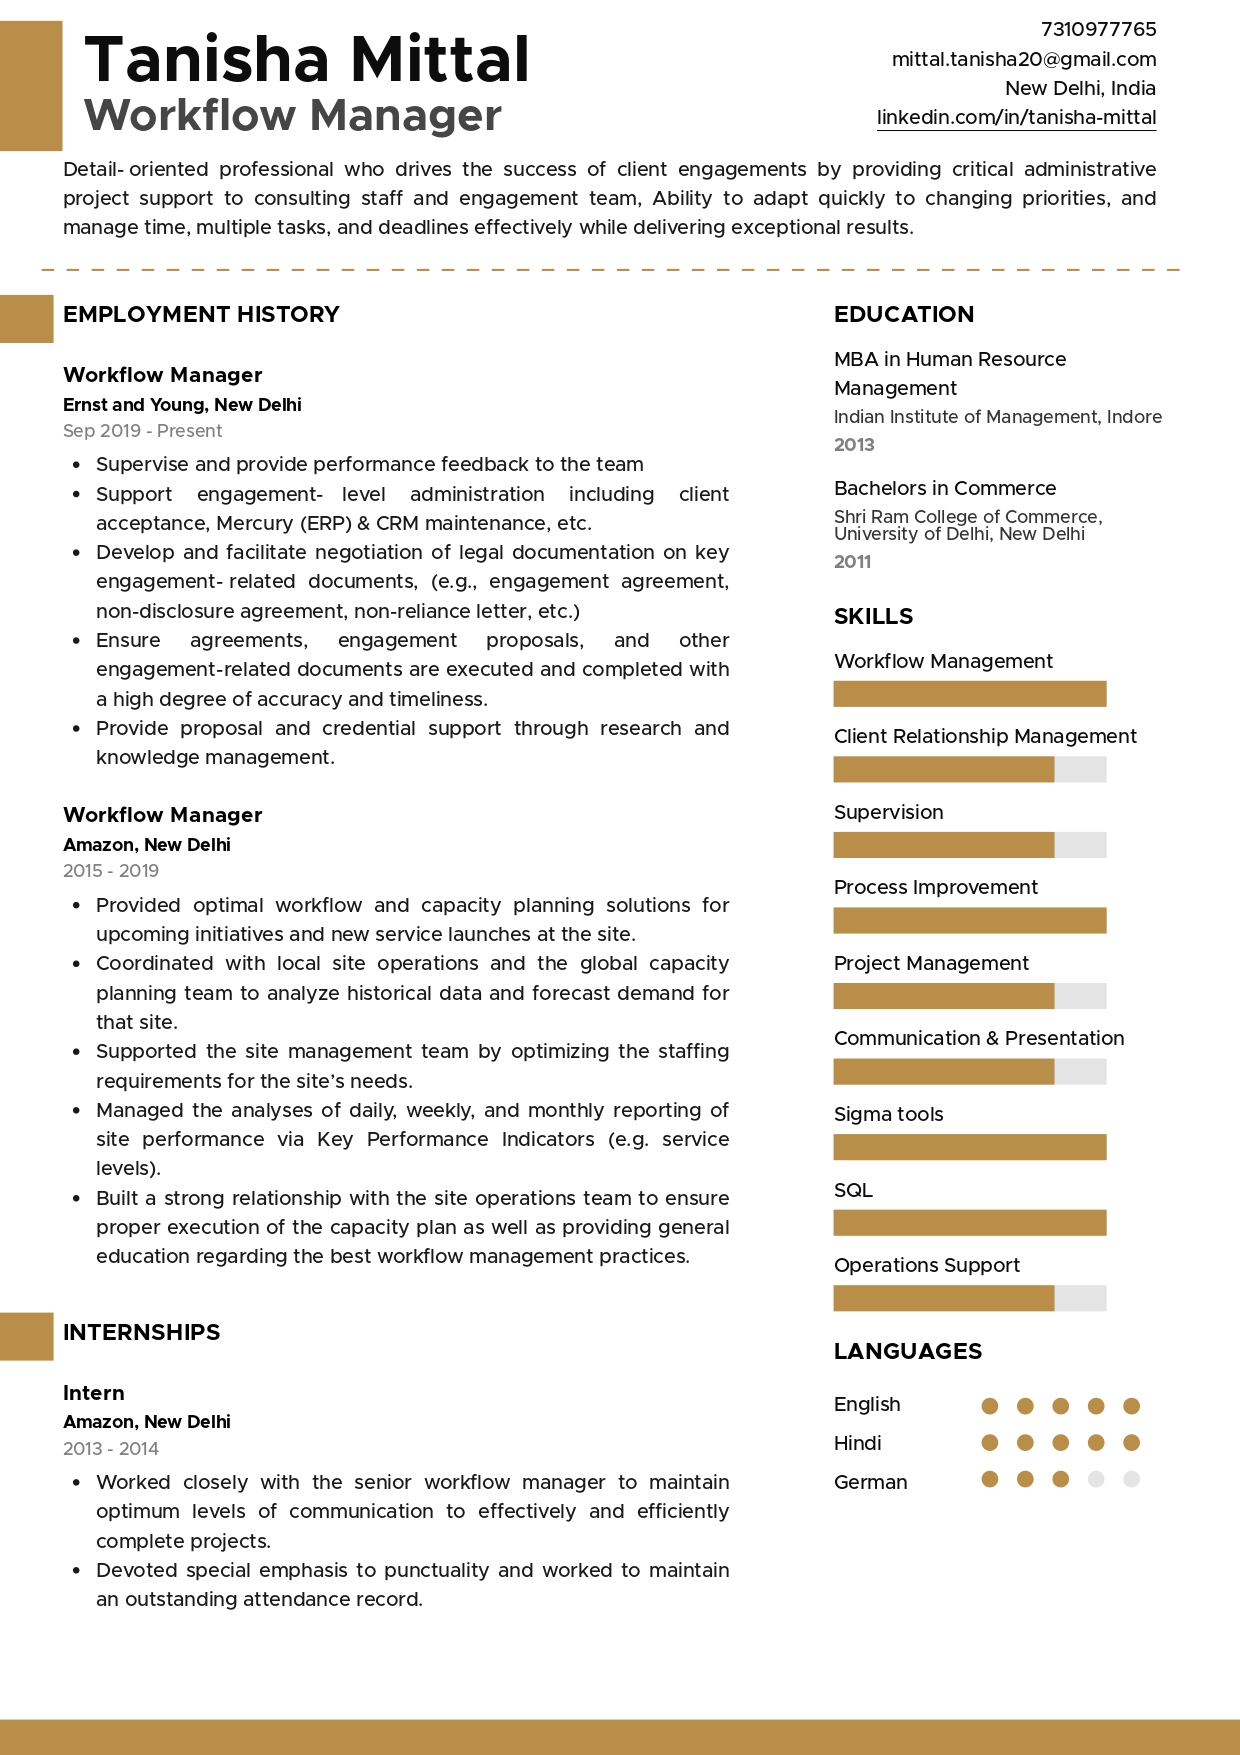 Sample Resume of Workflow Manager | Free Resume Templates & Samples on Resumod.co